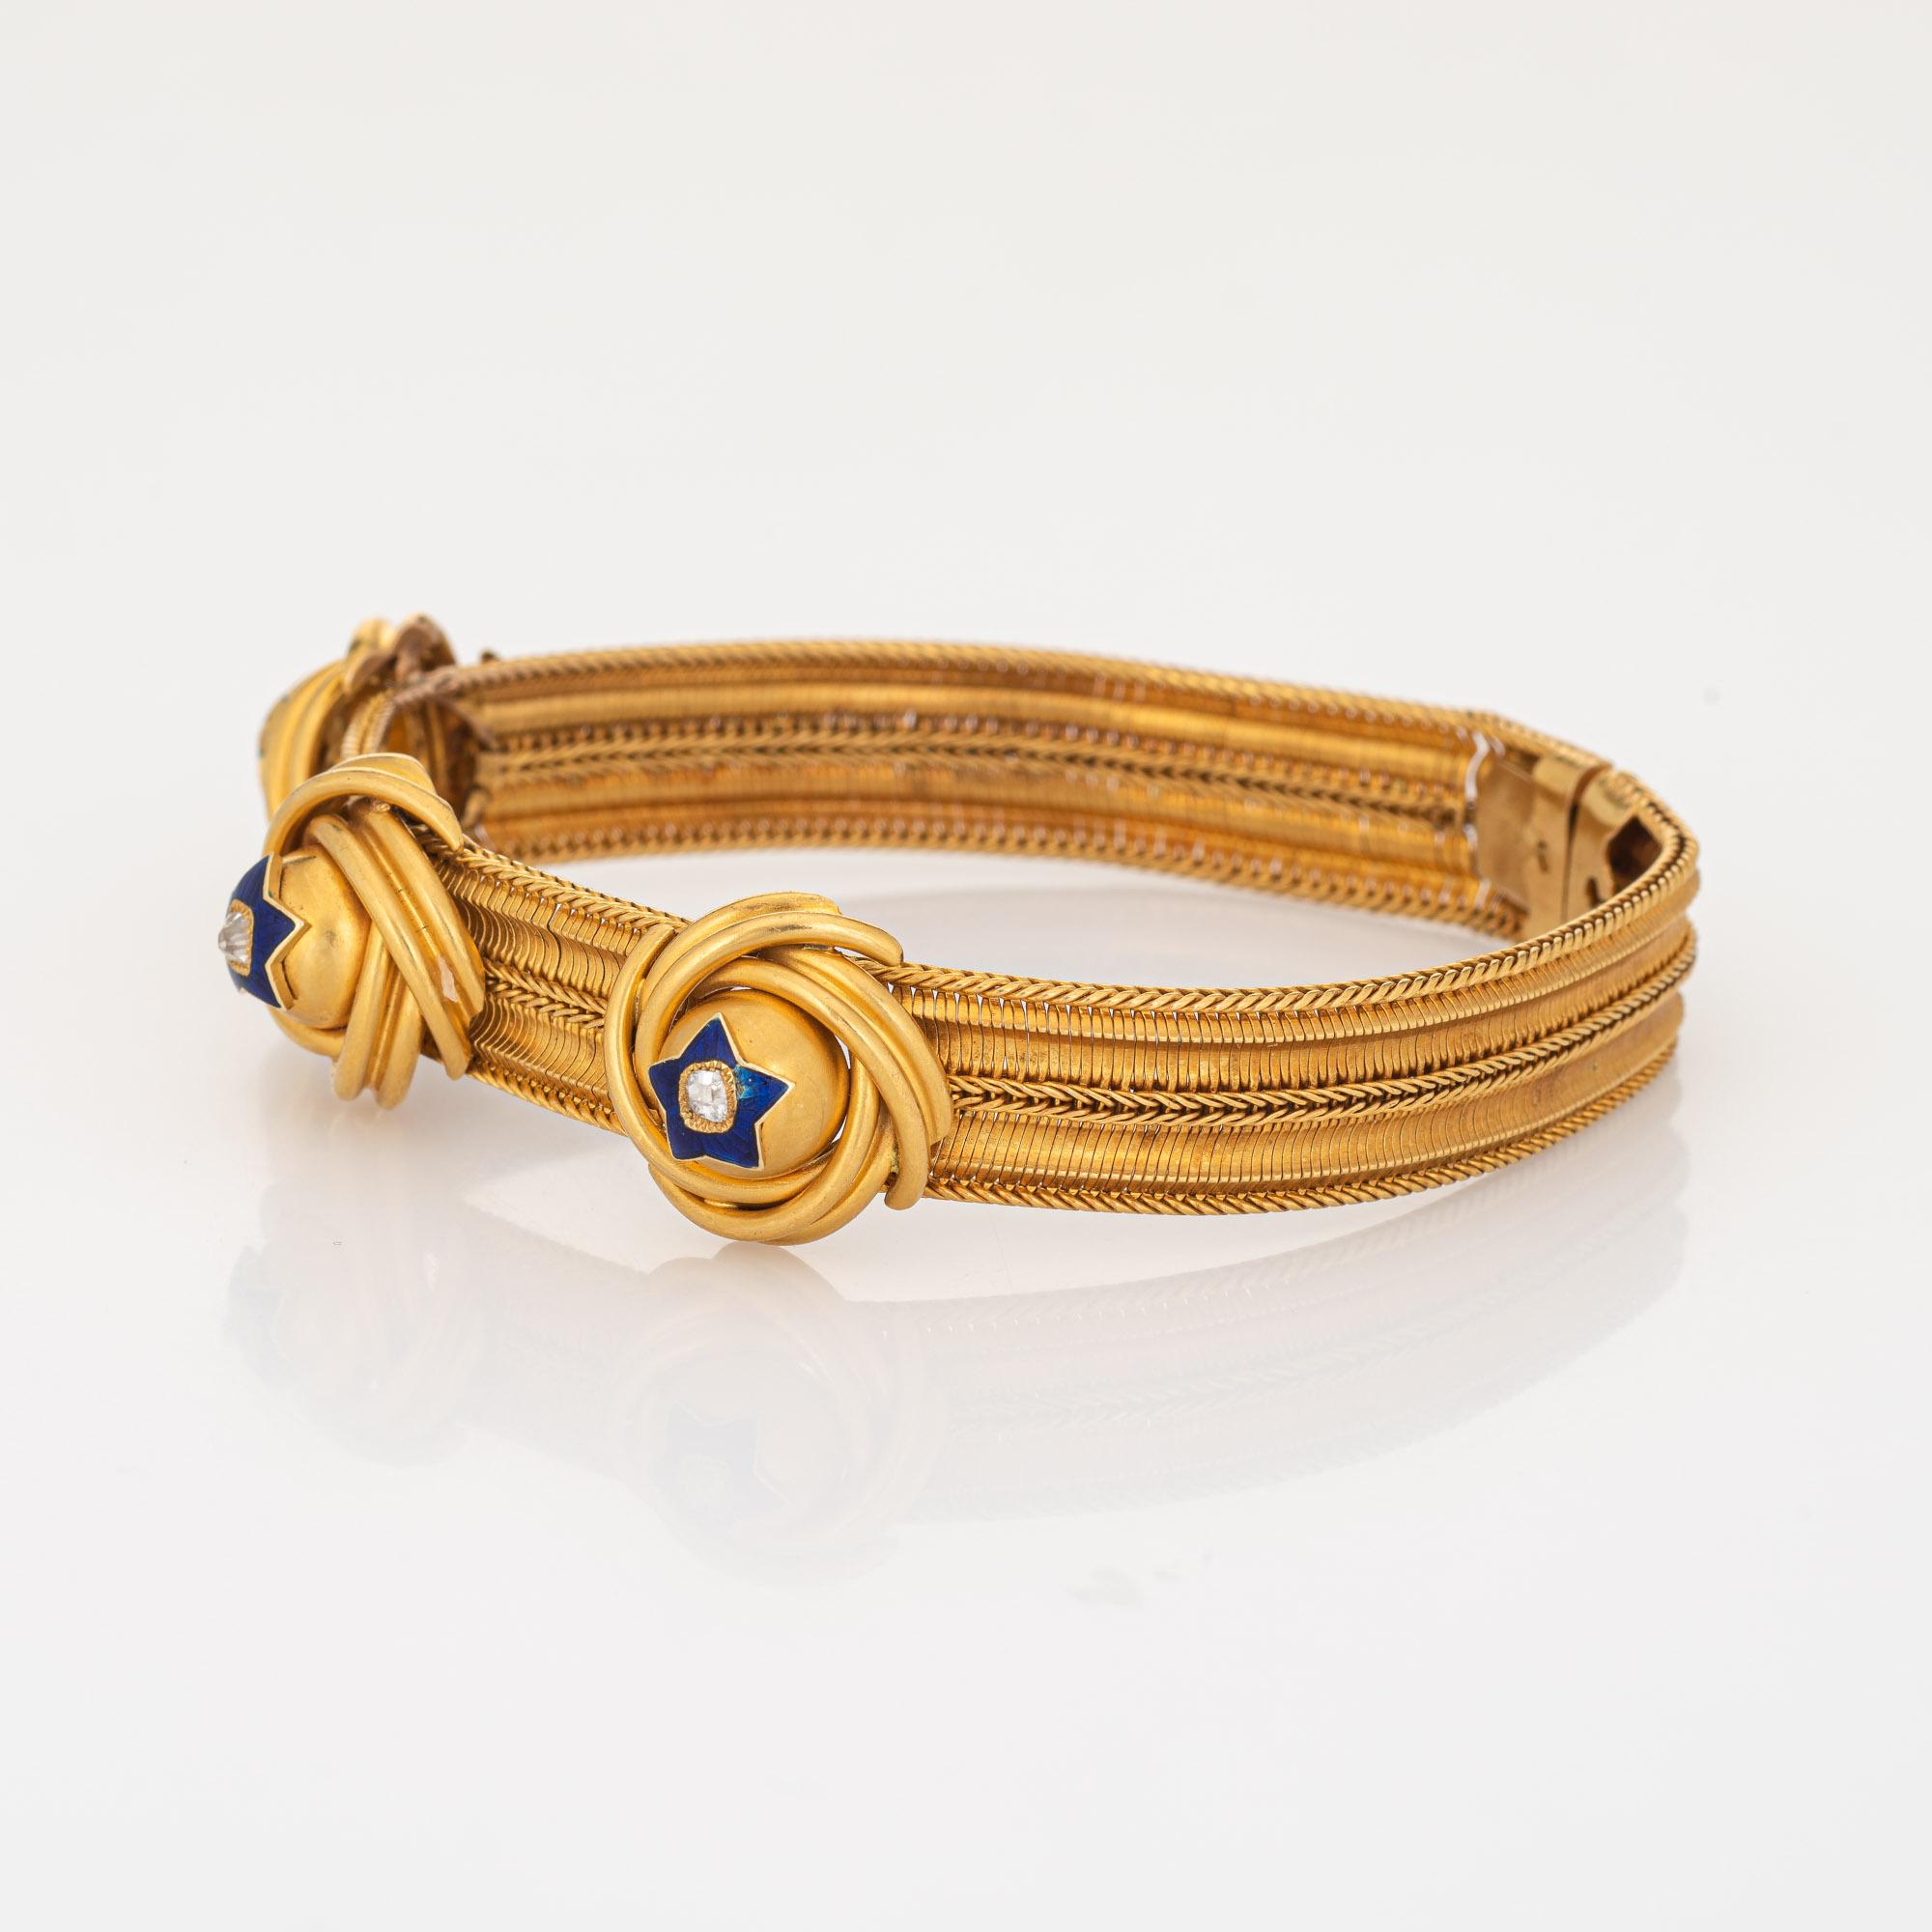 Finely detailed antique Victorian bracelet (circa 1850s) crafted in 14k yellow gold. 

Three old mine cut diamonds are estimated at 0.10 carats each and total an estimated 0.30 carats (estimated at I-J color and I1 clarity).

Three infinity knots to